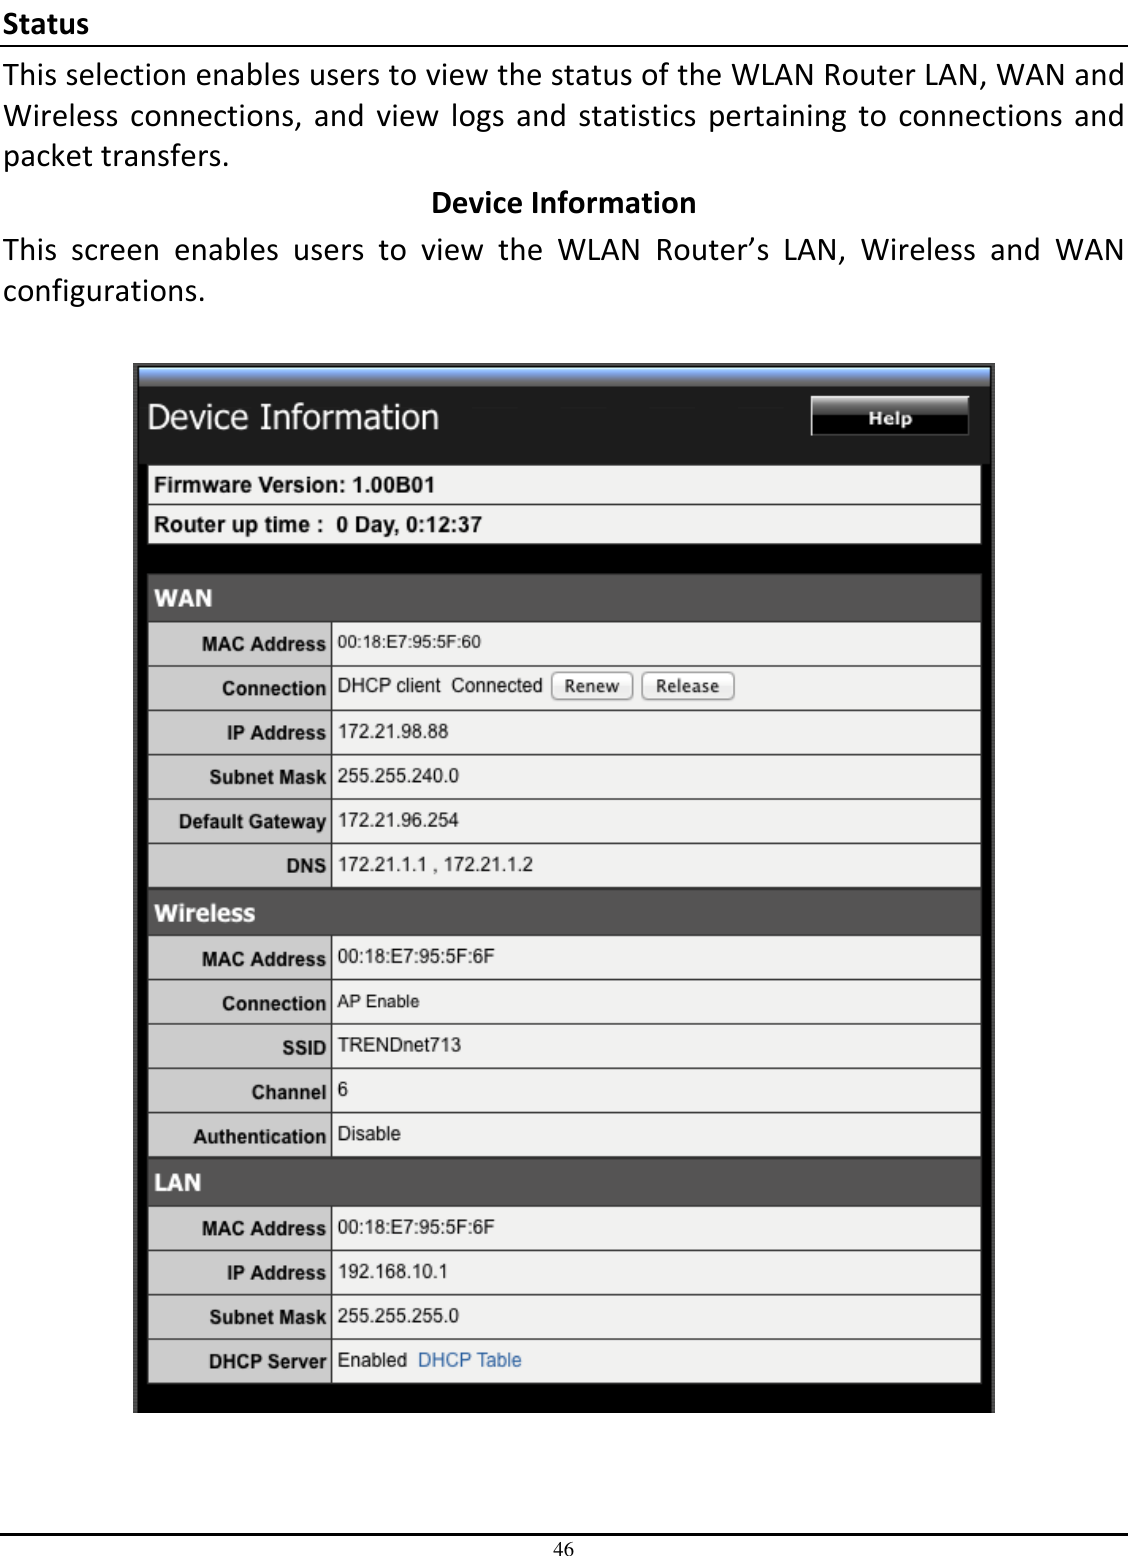 46 Status This selection enables users to view the status of the WLAN Router LAN, WAN and Wireless connections, and view logs and statistics pertaining to connections and packet transfers. Device Information This  screen  enables  users  to  view  the  WLAN  Router’s  LAN,  Wireless  and  WAN configurations.    